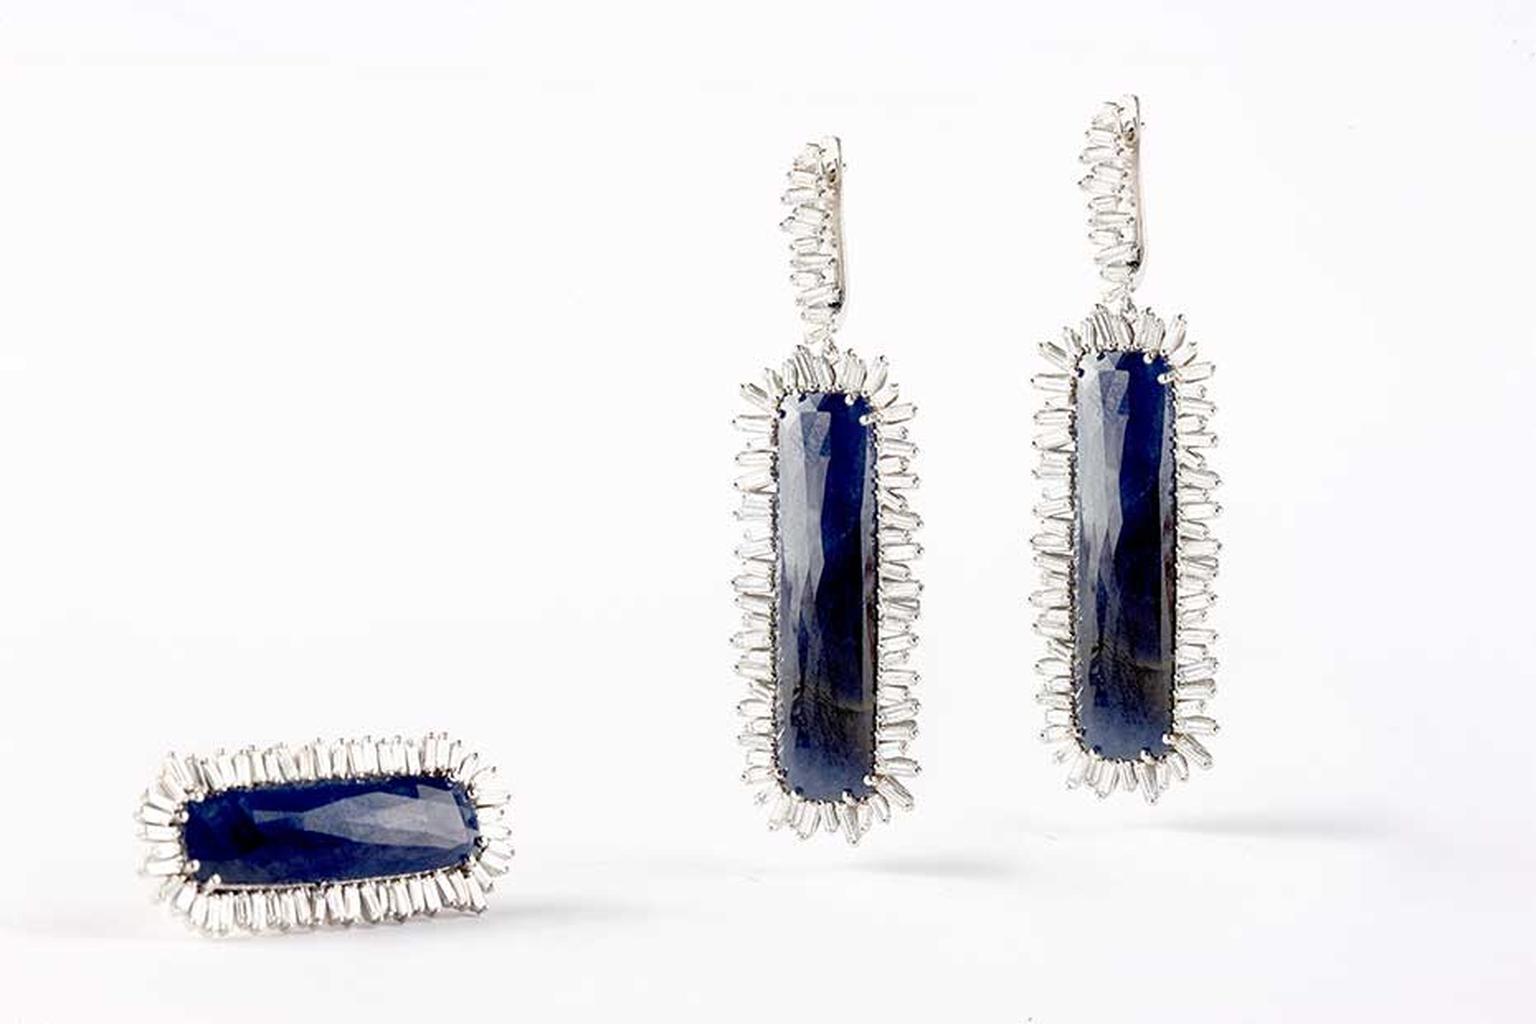 Suzanne Kalan one-of-a-kind white gold Vitrine ring with diamonds and a 16.40ct blue sapphire and white gold Vitrine earrings with baguette diamonds and 51.22ct blue sapphires ($36,000)